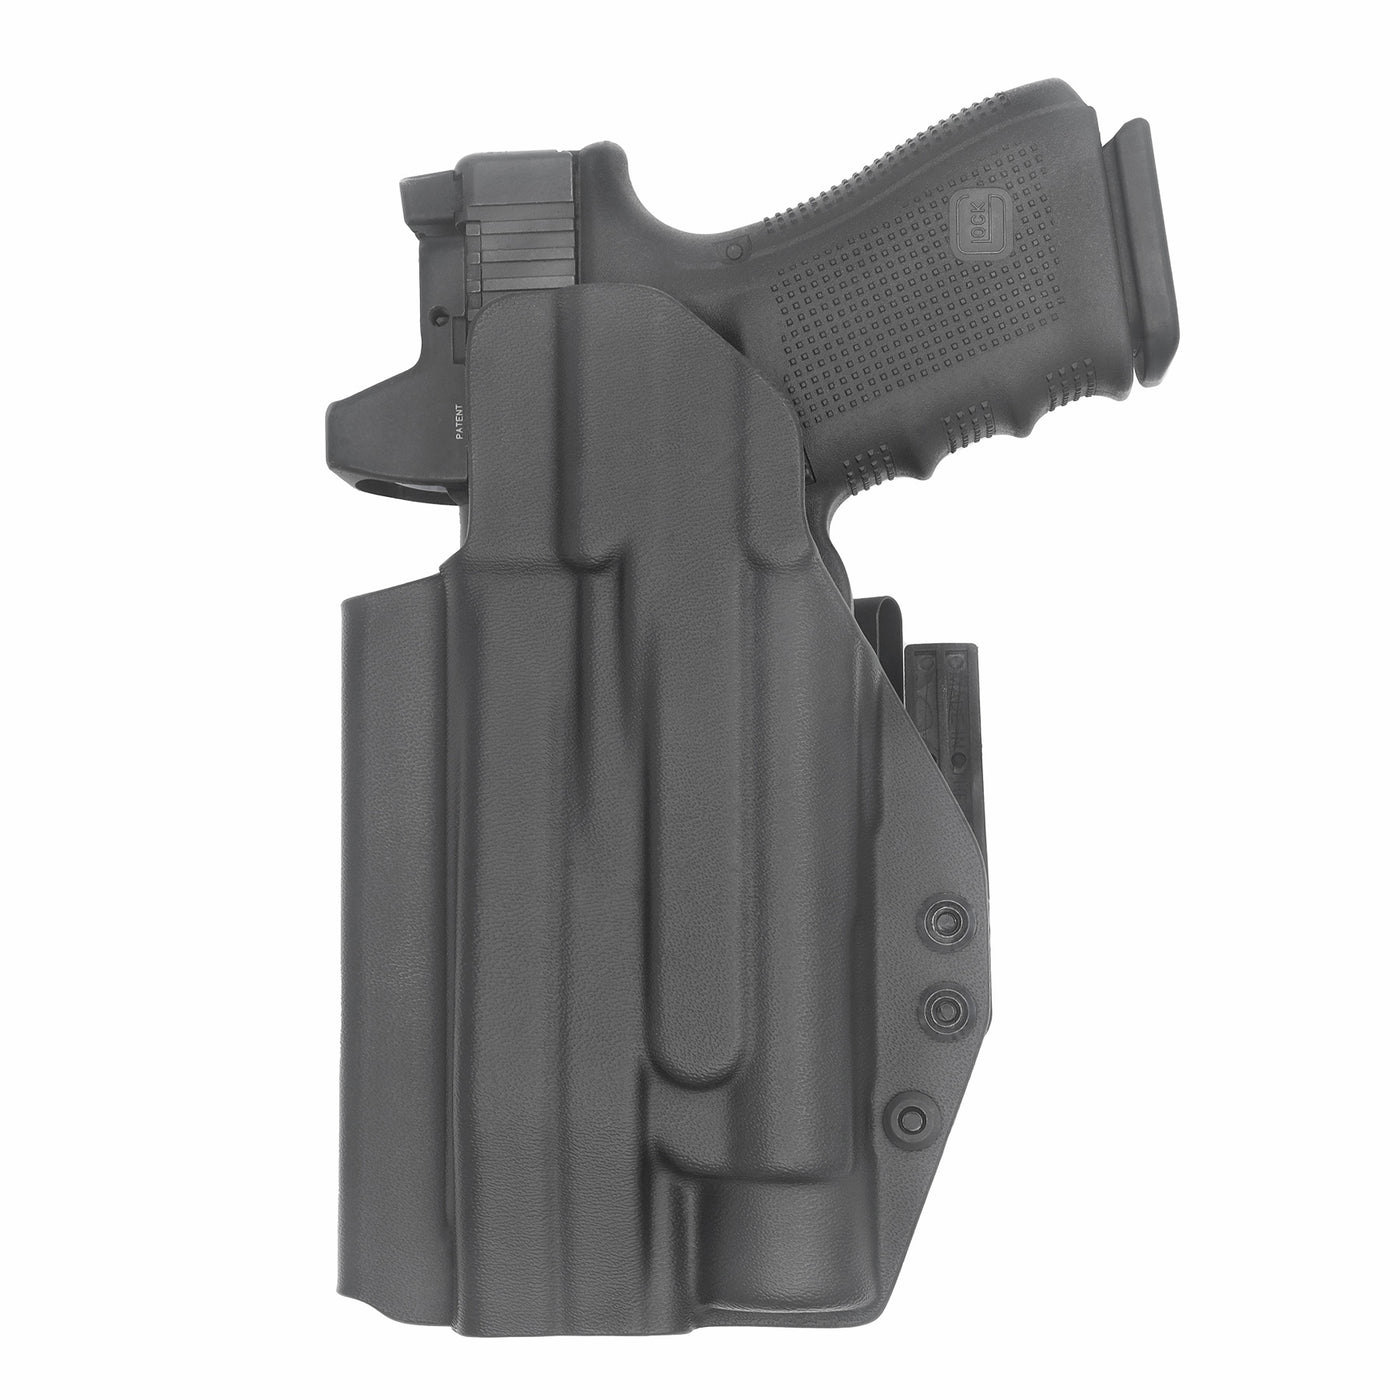 C&G Holsters quickship IWB Tactical ALPHA UPGRADE CZ P10/c Streamlight TLR-1 in holstered position back view